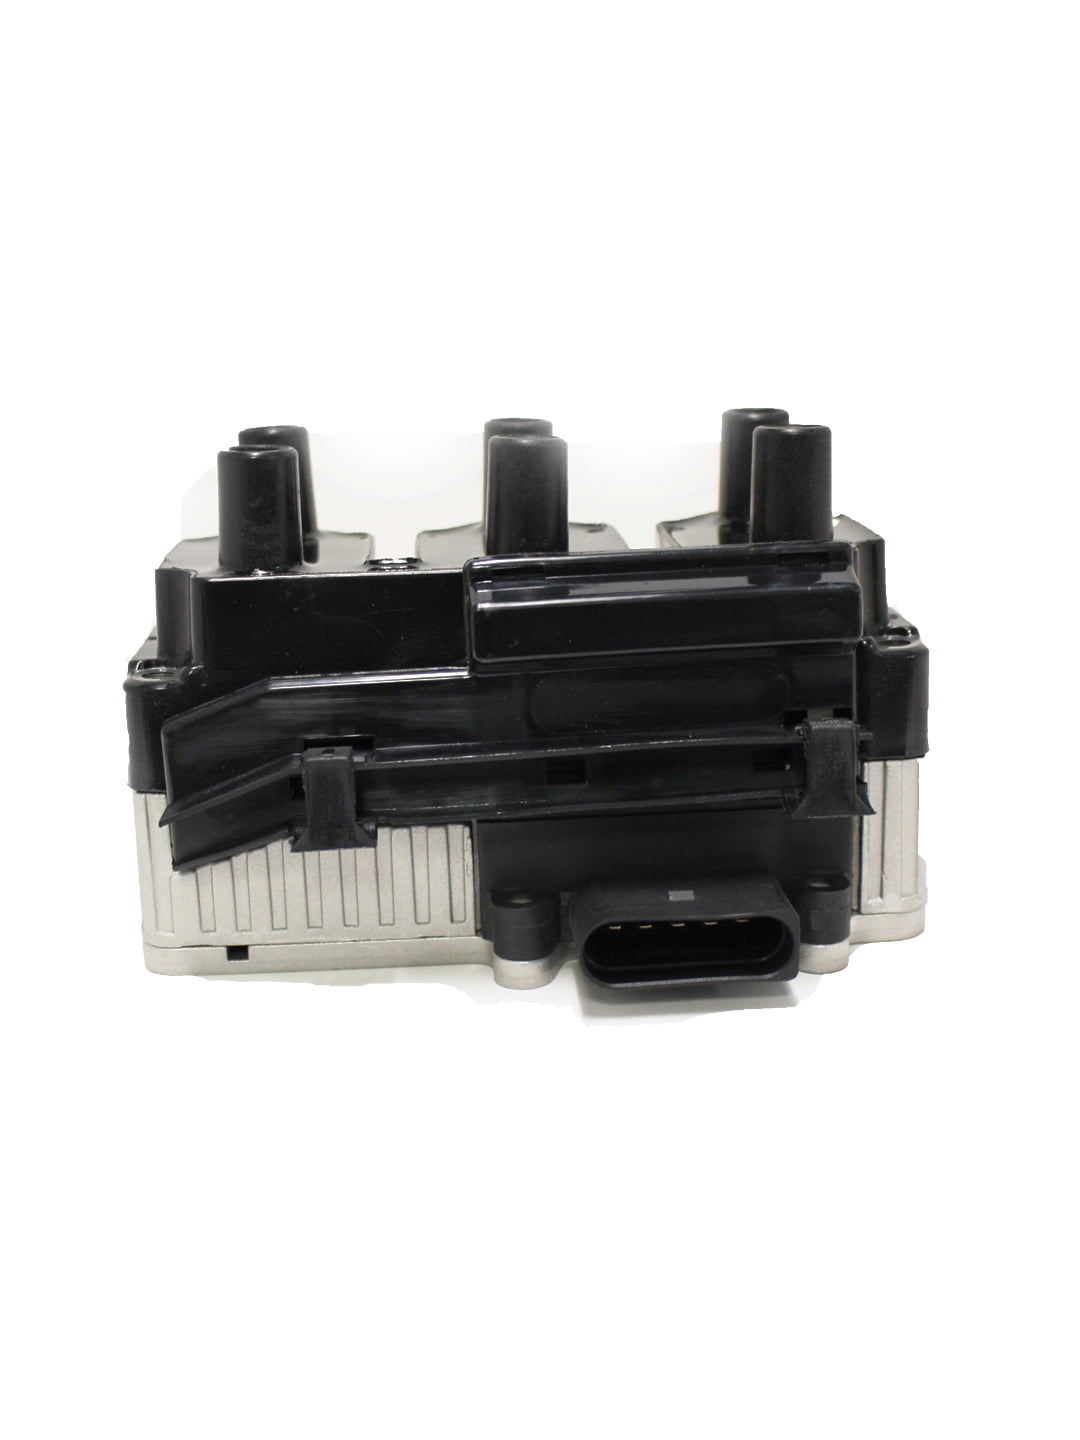 OEM Quality New Ignition Coil for 1998-2003 Volkswagen Golf UF338 Jetta 2.8L